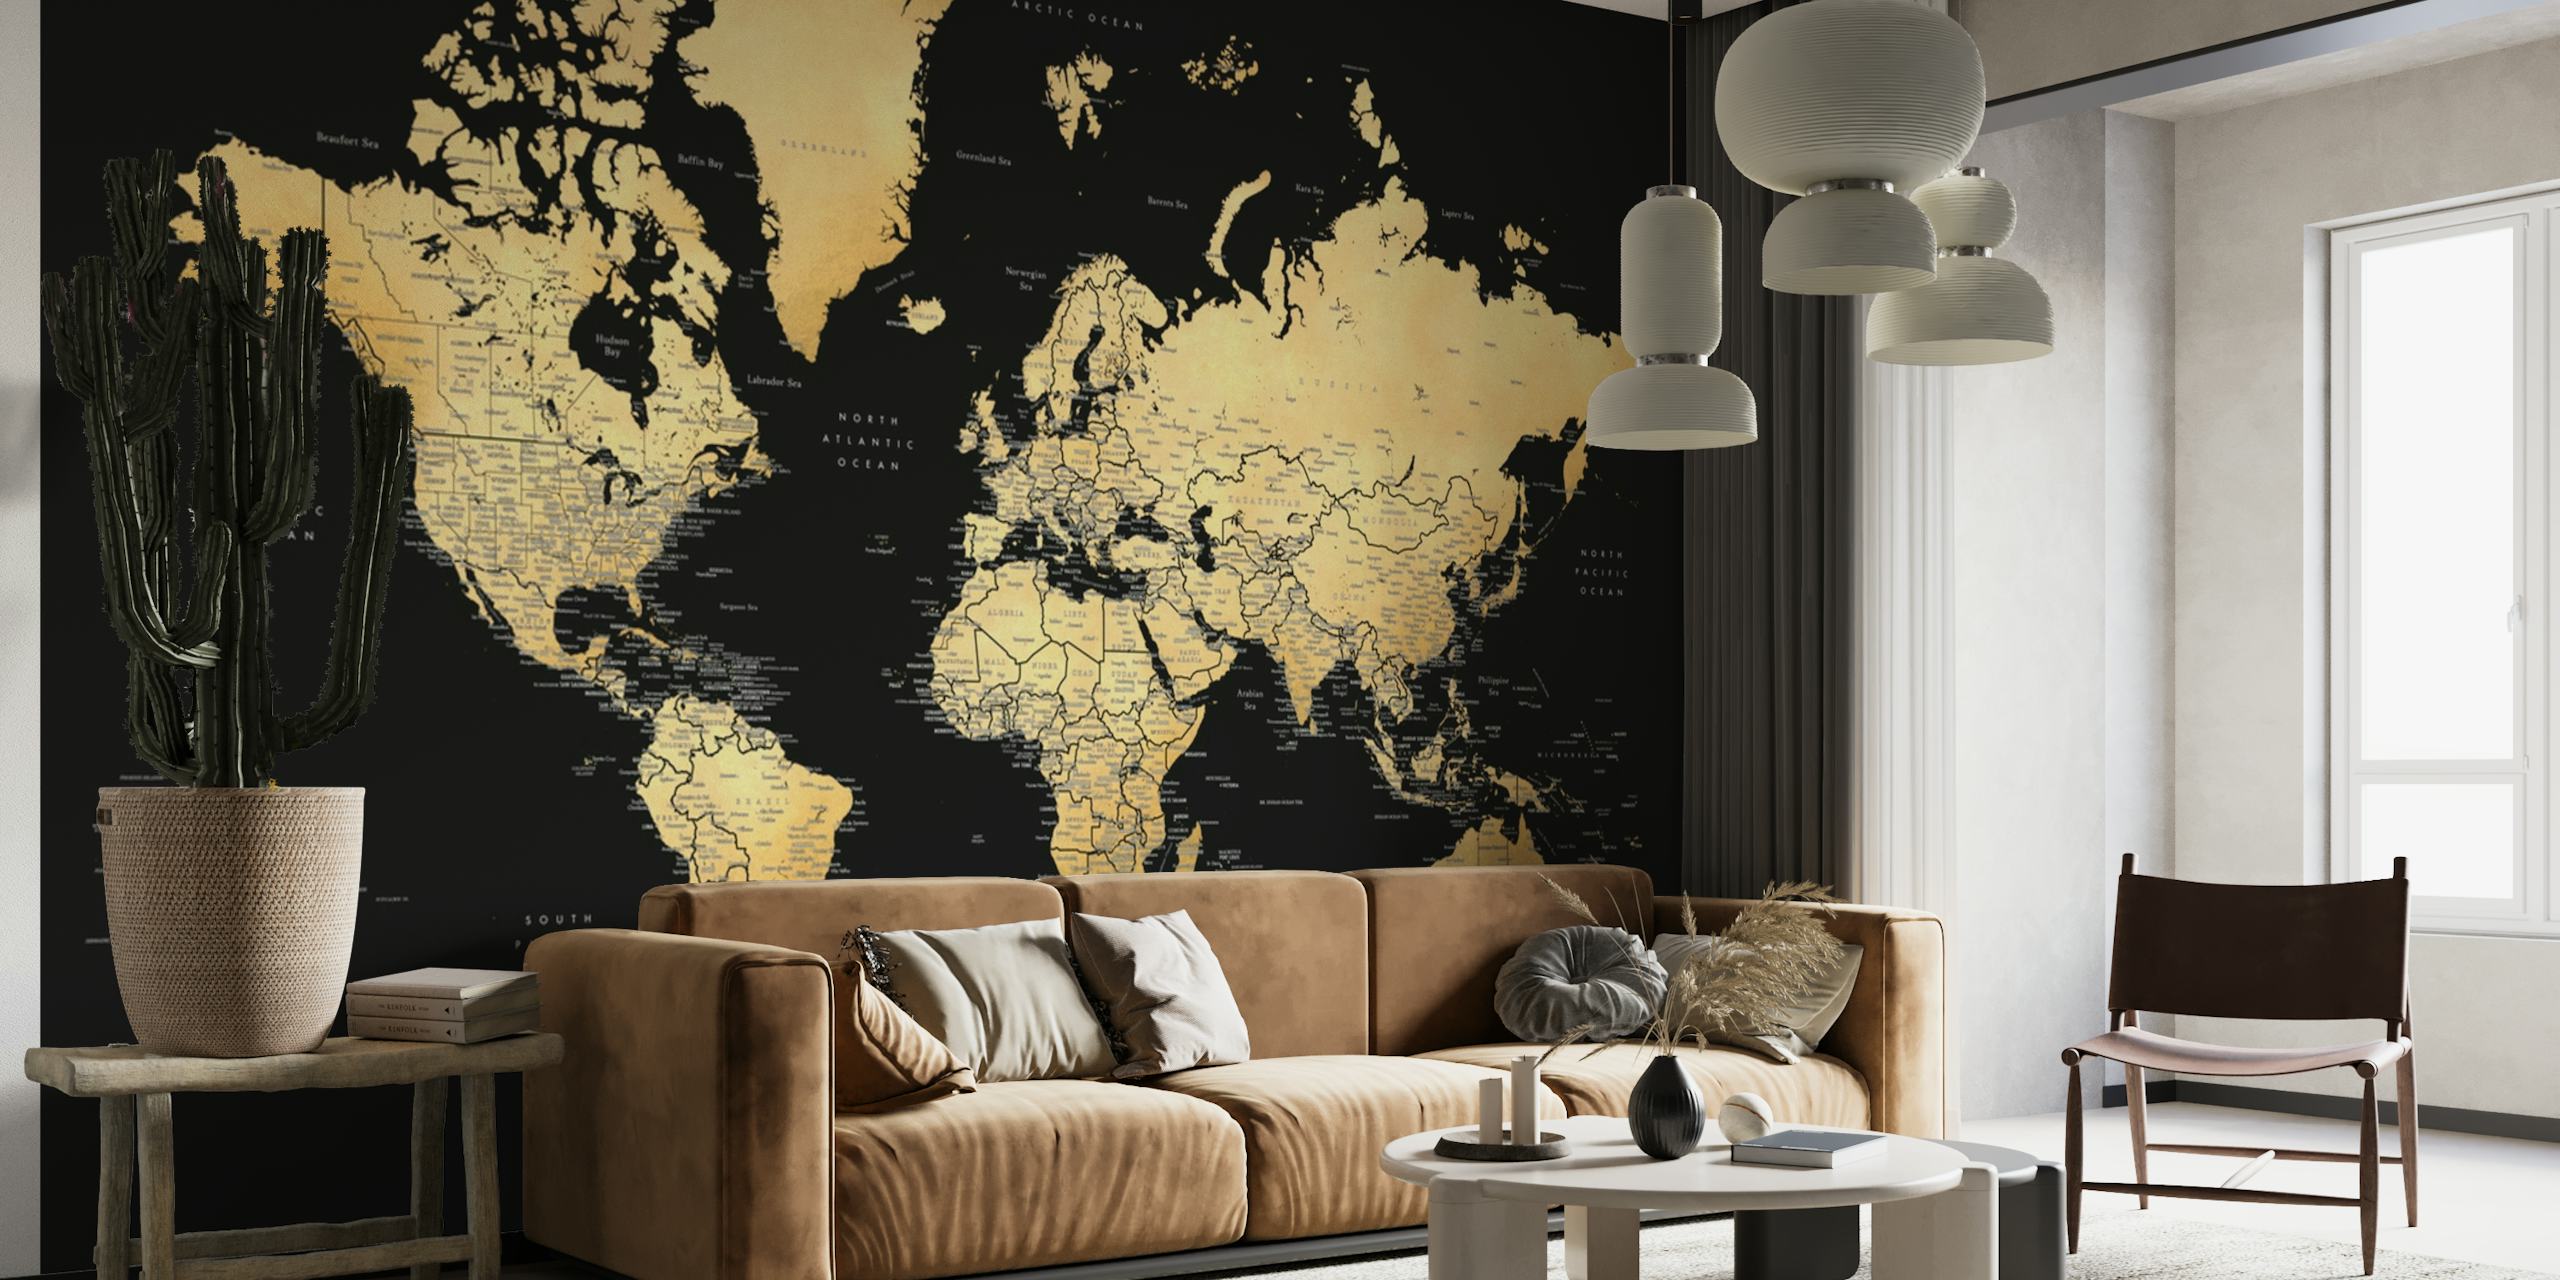 Elegant world map wall mural in rich sepia tones with detailed labels